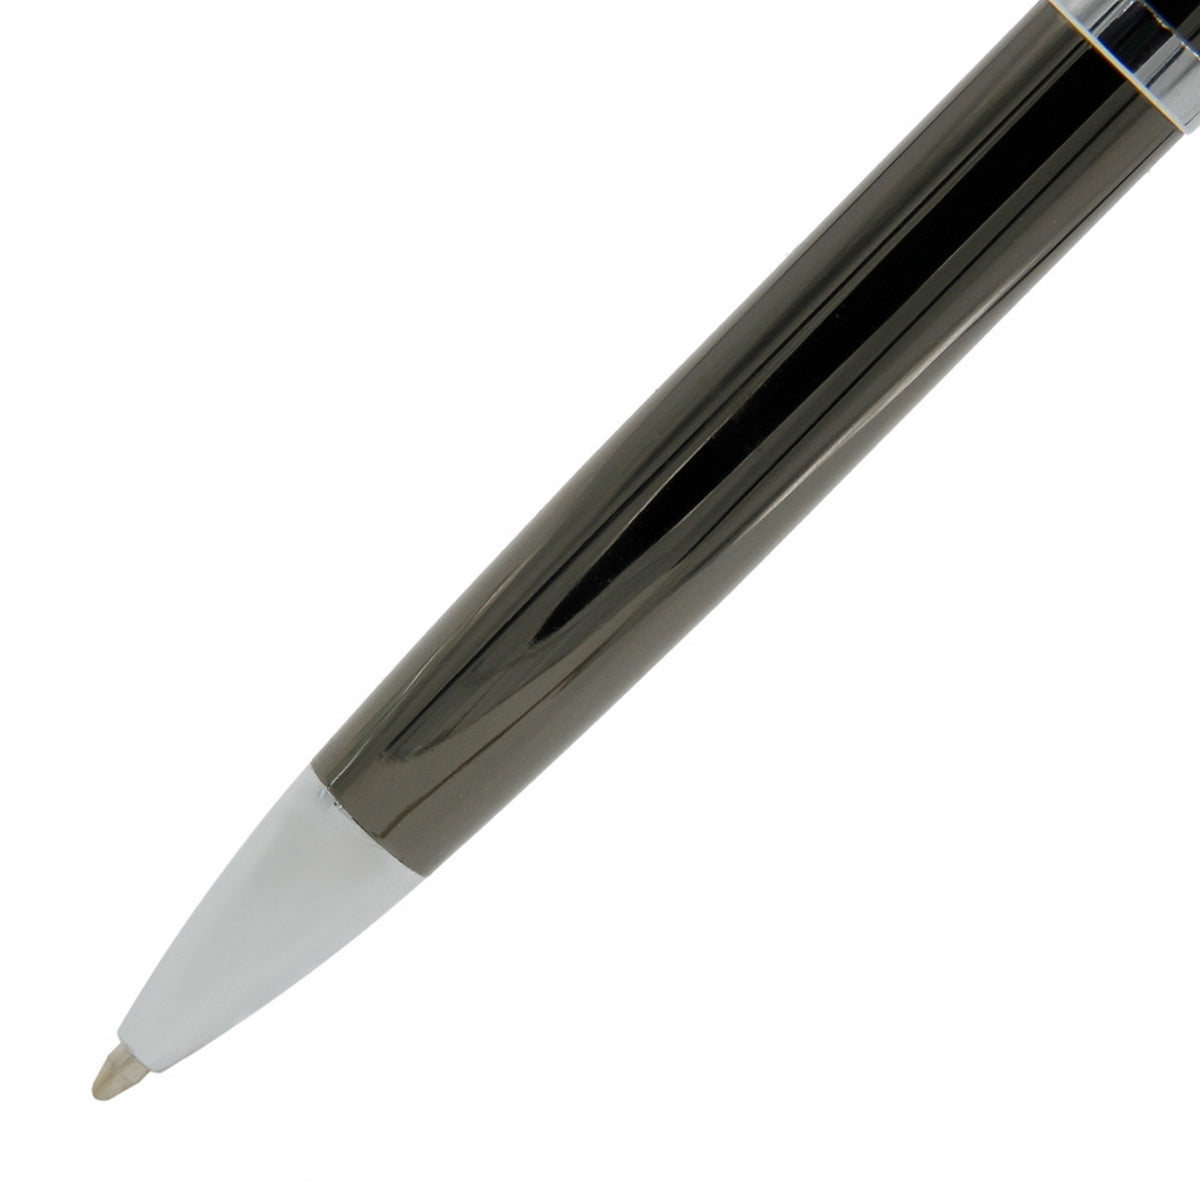 Ball Pen Black Silver Clip Gun Mate - For Office, College, Personal Use, Corporate Gifting, Return Gift - Visakhapatnam